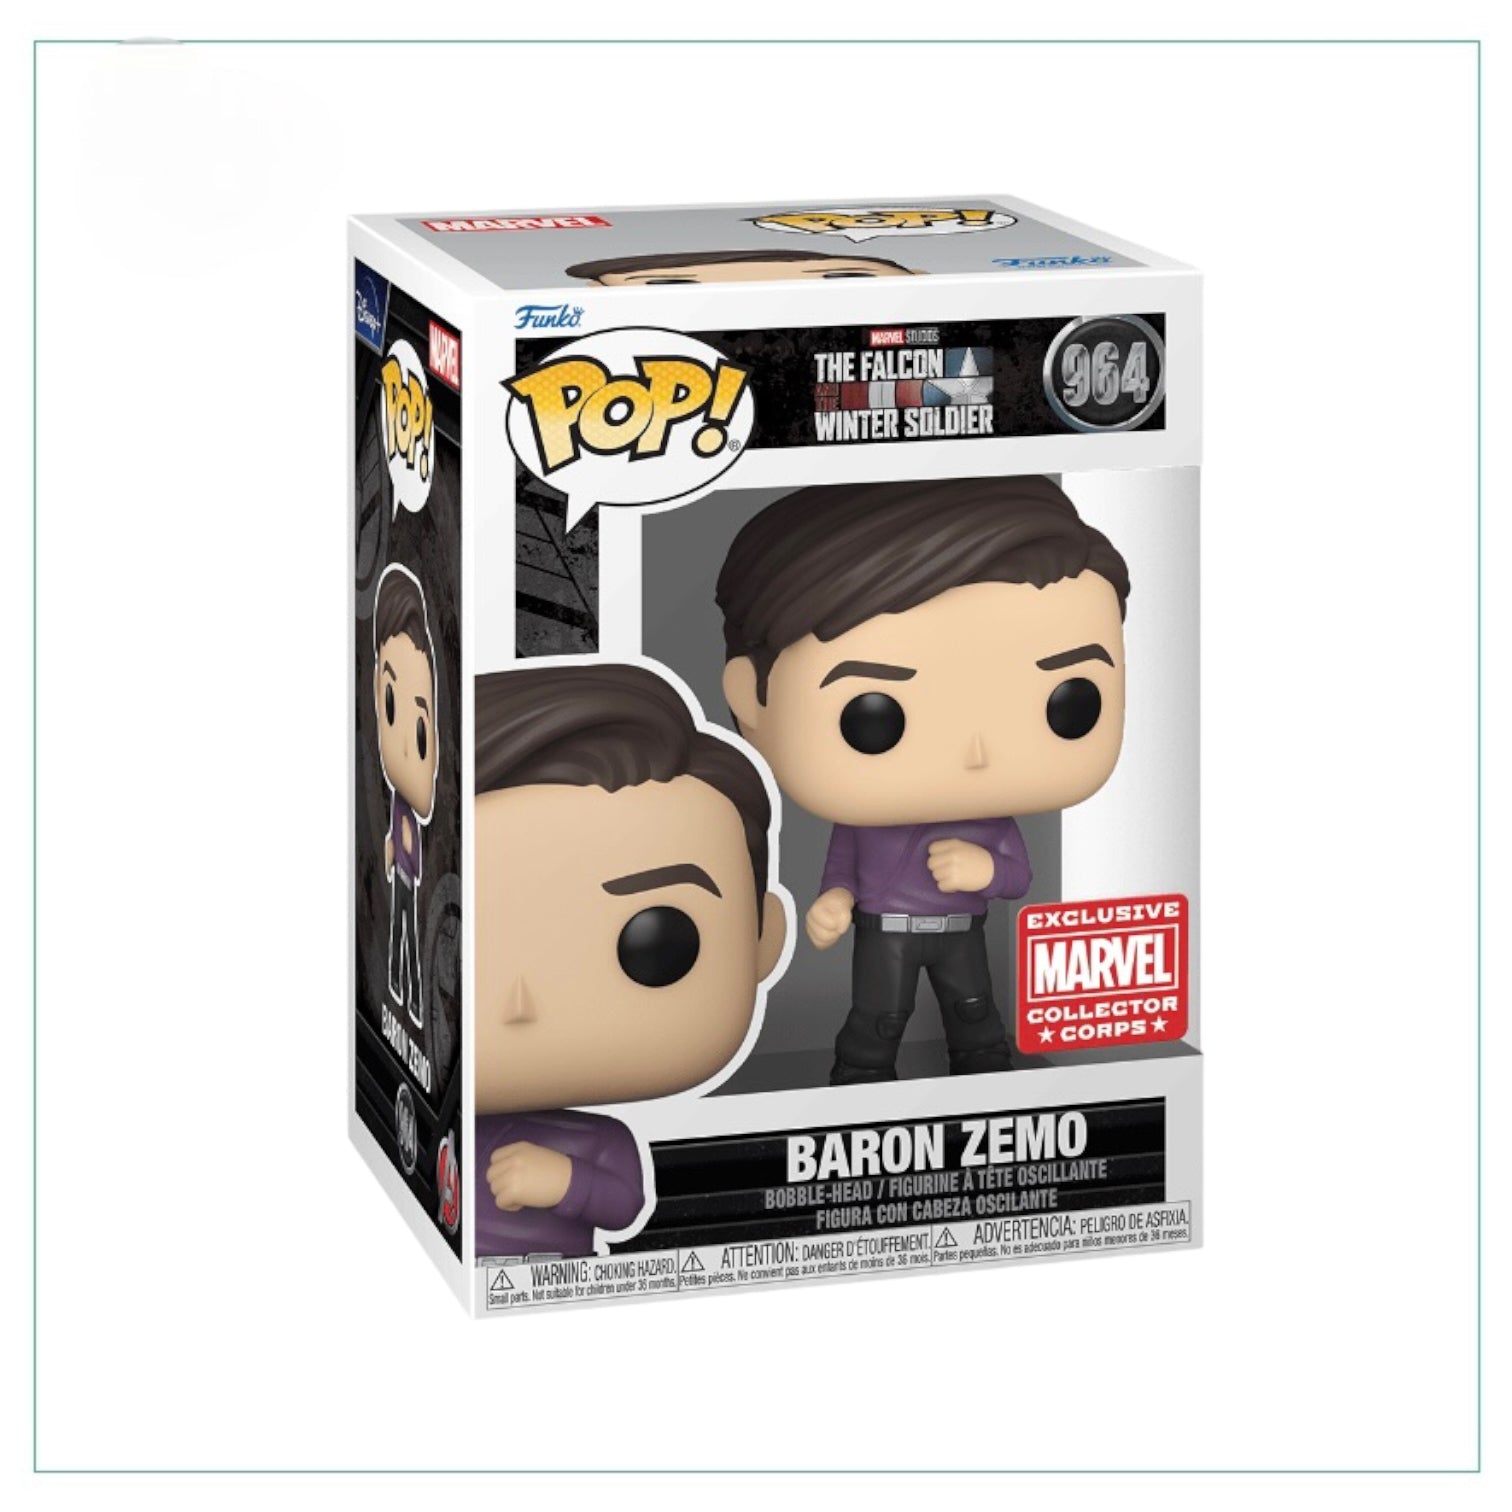 Baron Zemo #964 Funko Pop! - The Falcon and The Winter Soldier - Marvel Collector Corps Exclusive